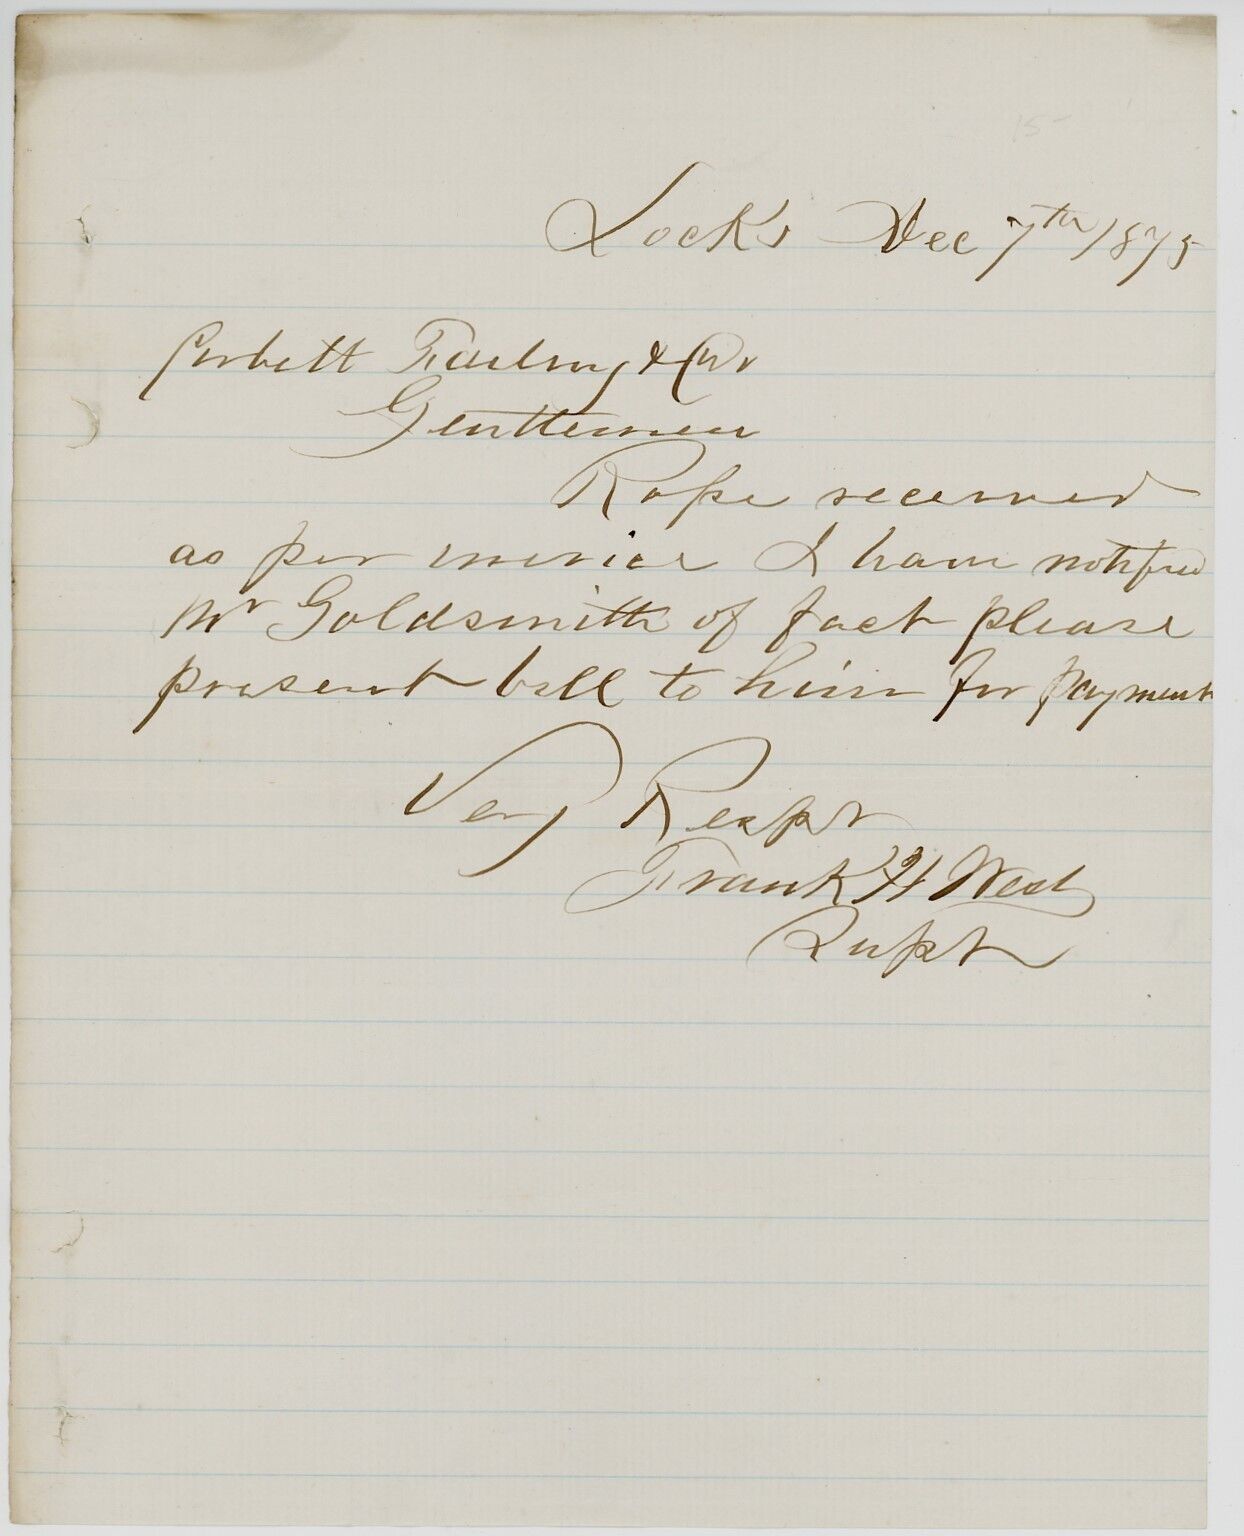 1875 Letter from Oregon City Canal & Locks Company Superintendent Frank West